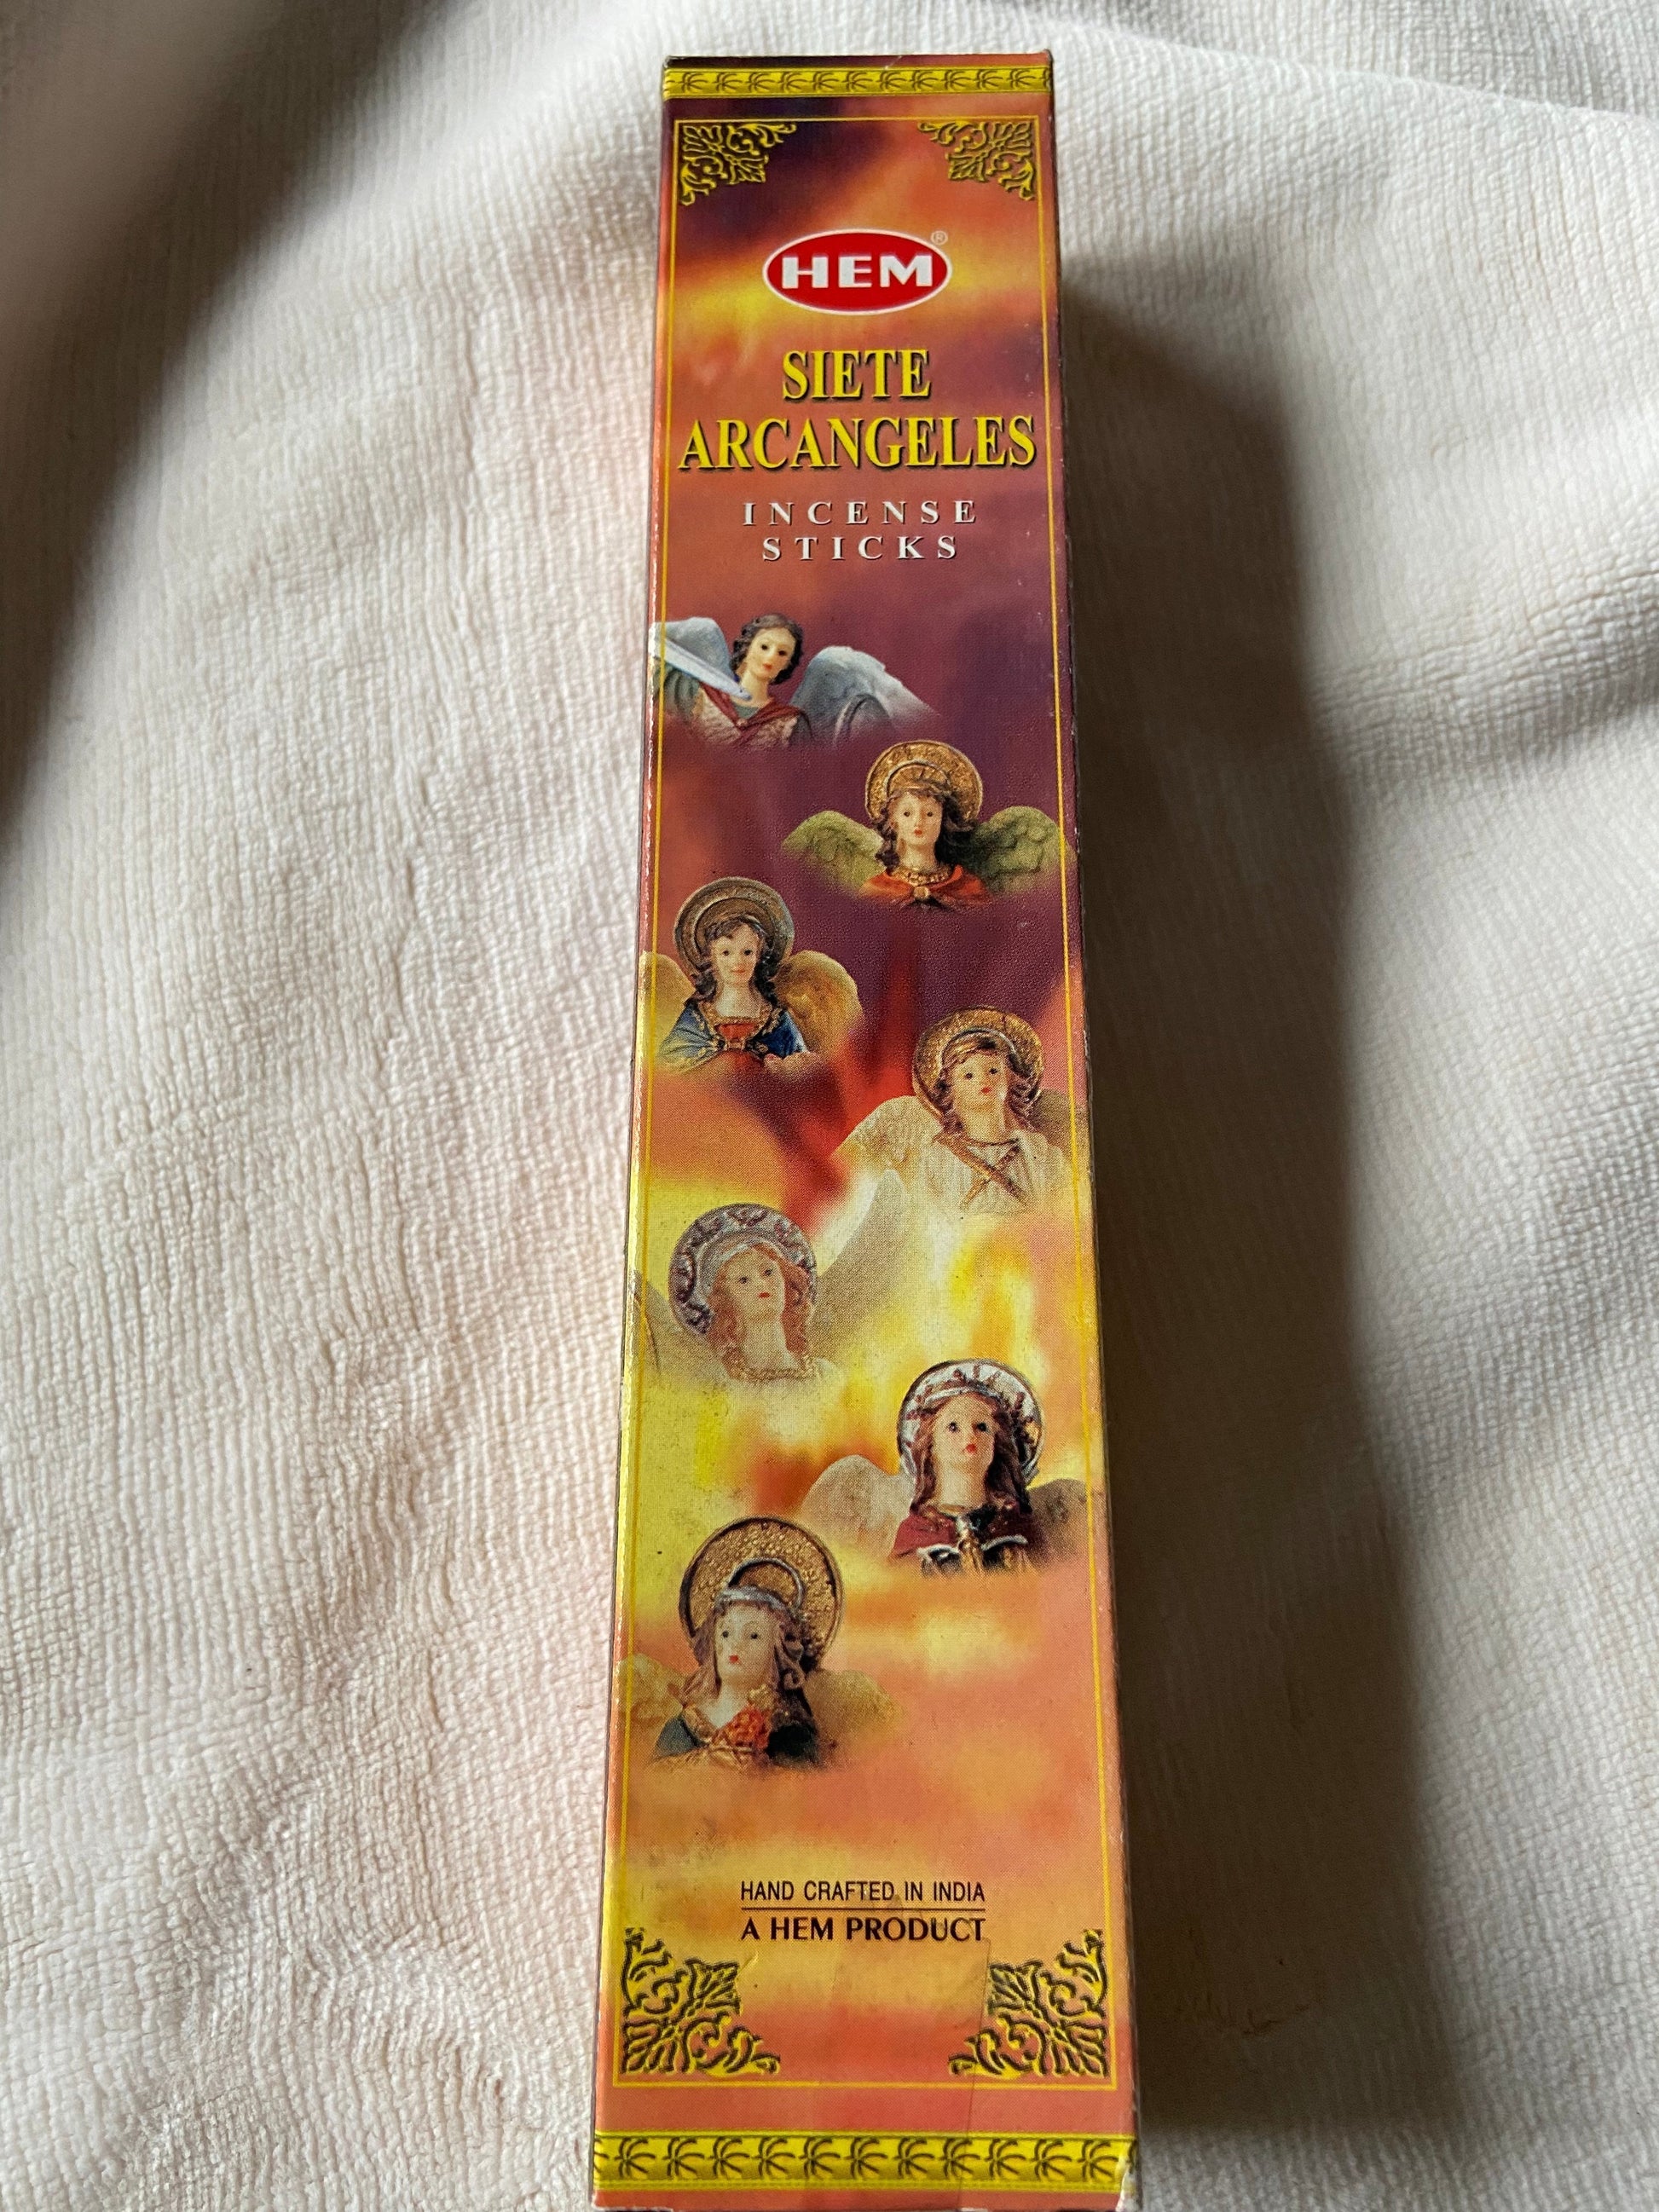  7 Archangels Incense Sticks - Incense available at Amazing Creations Products . Grab yours for $6.99 today!